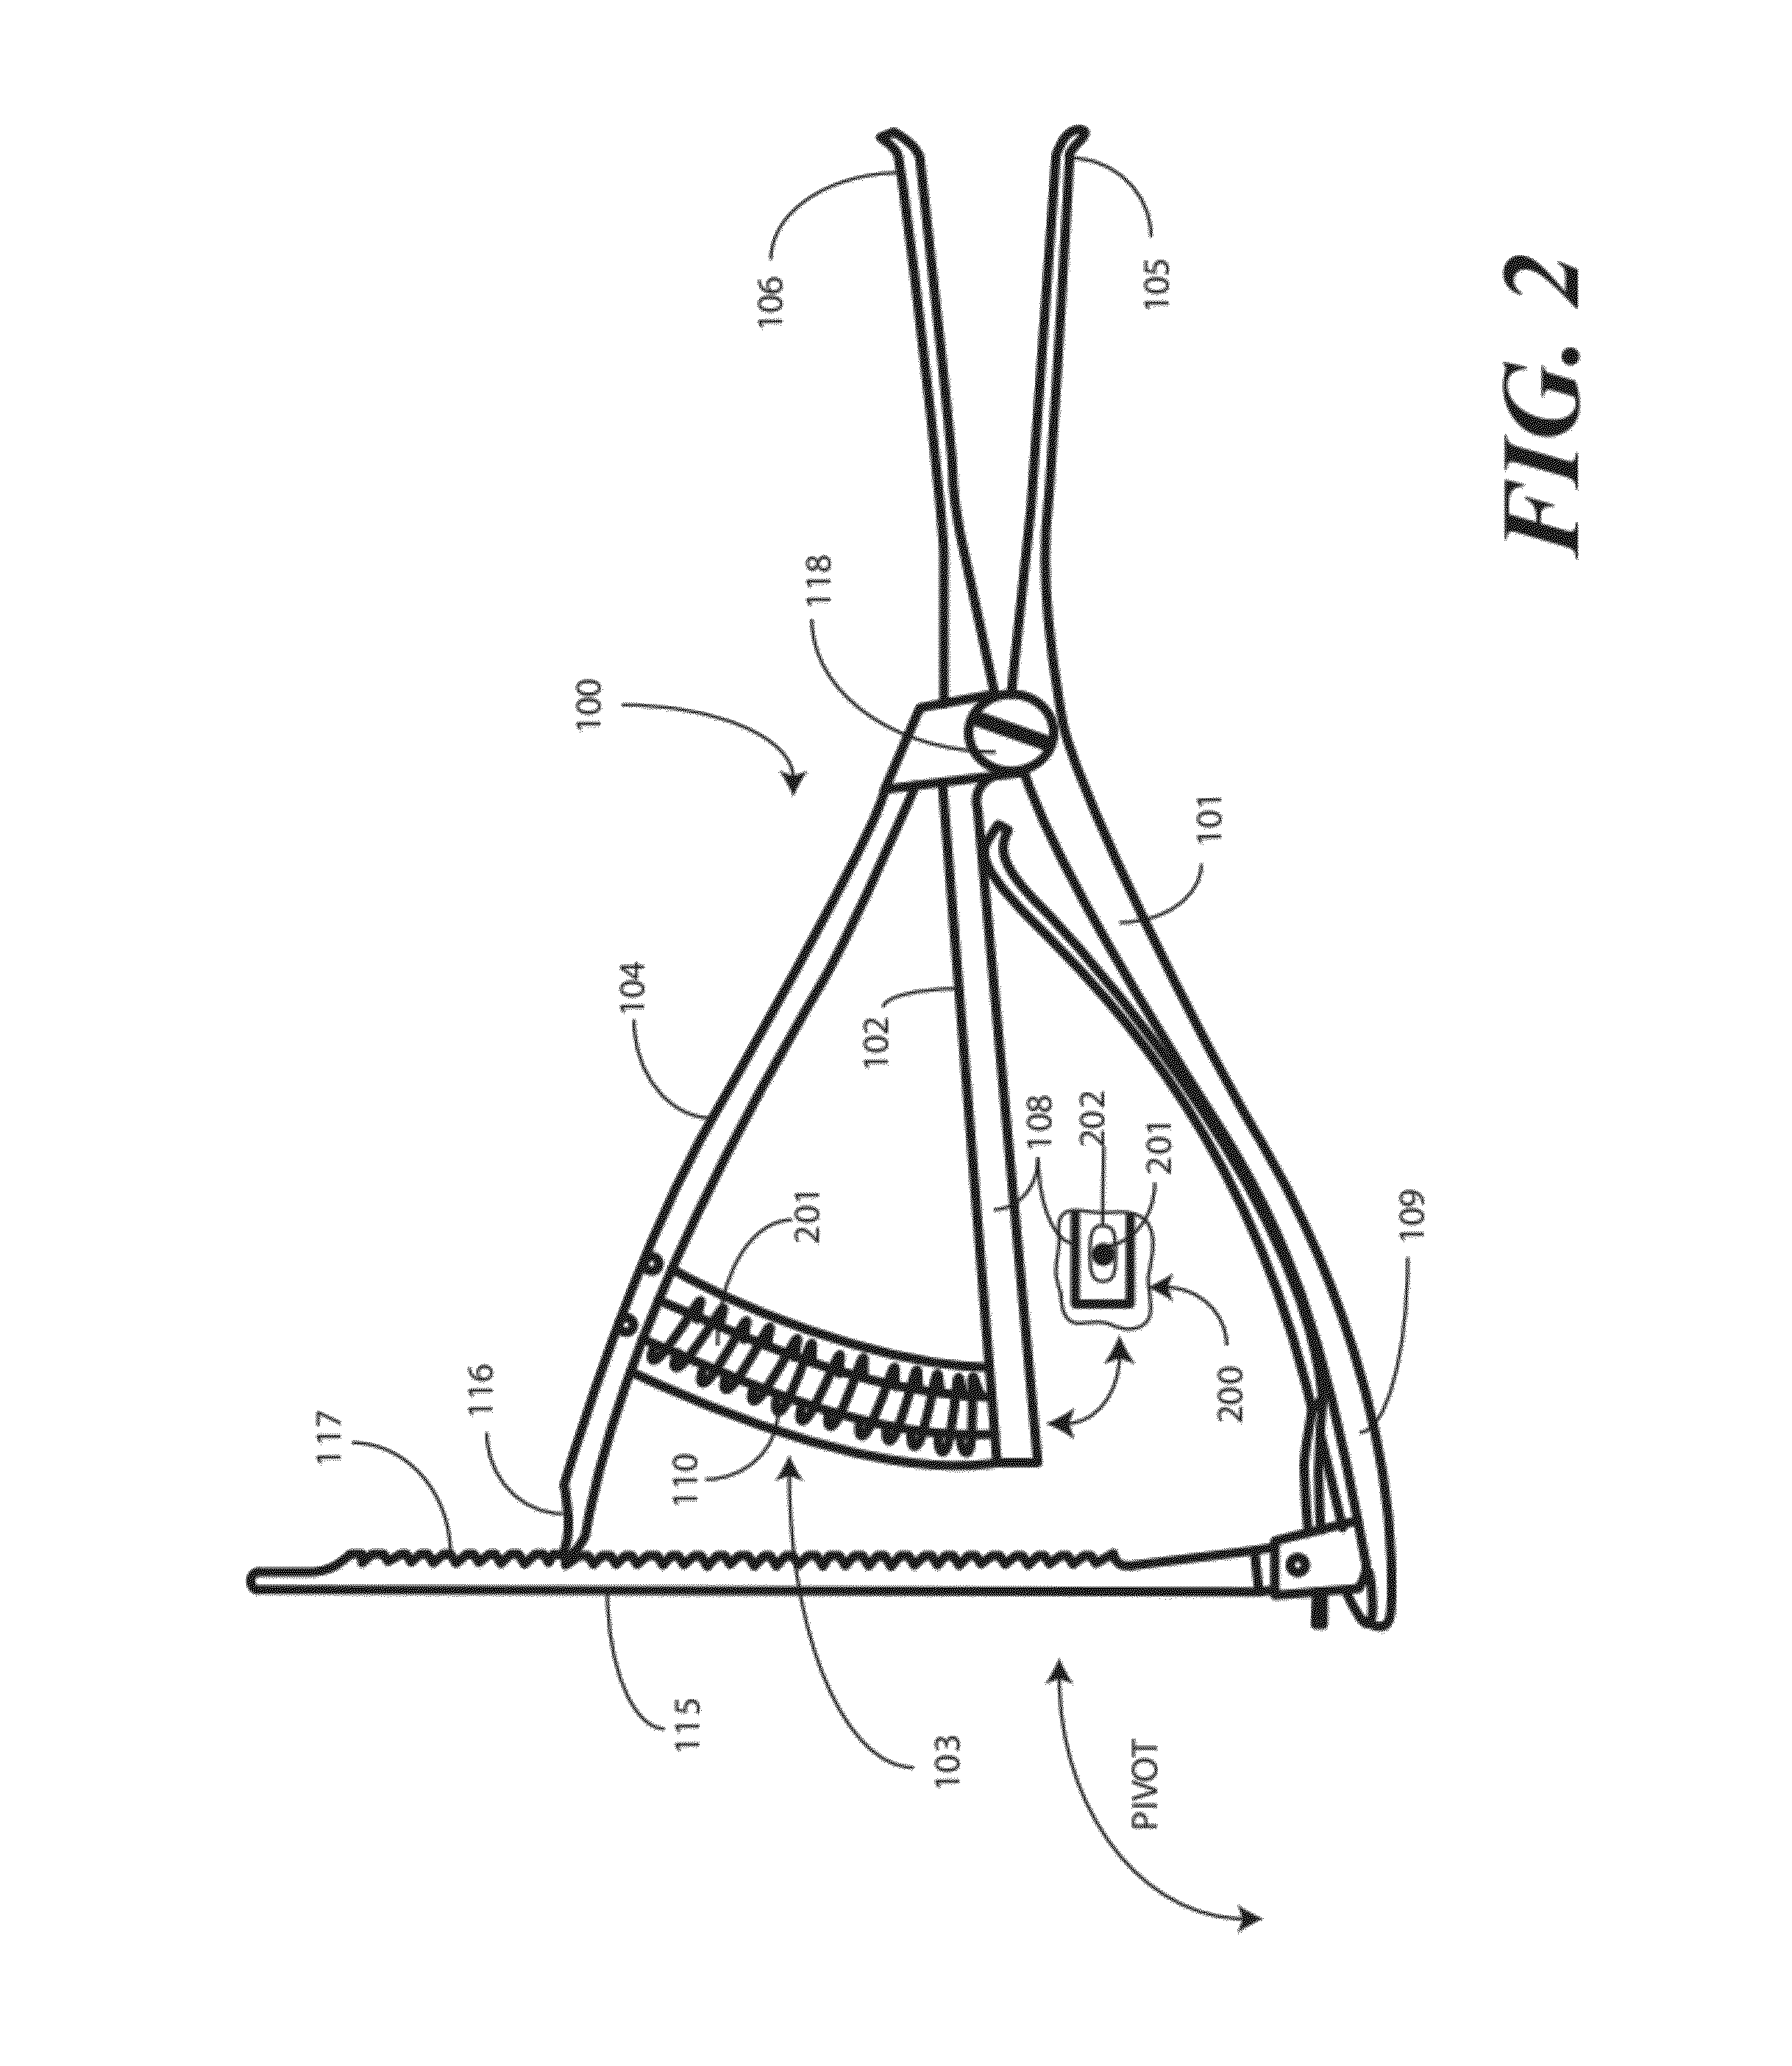 Femoral tibial spreader with tensor measurement